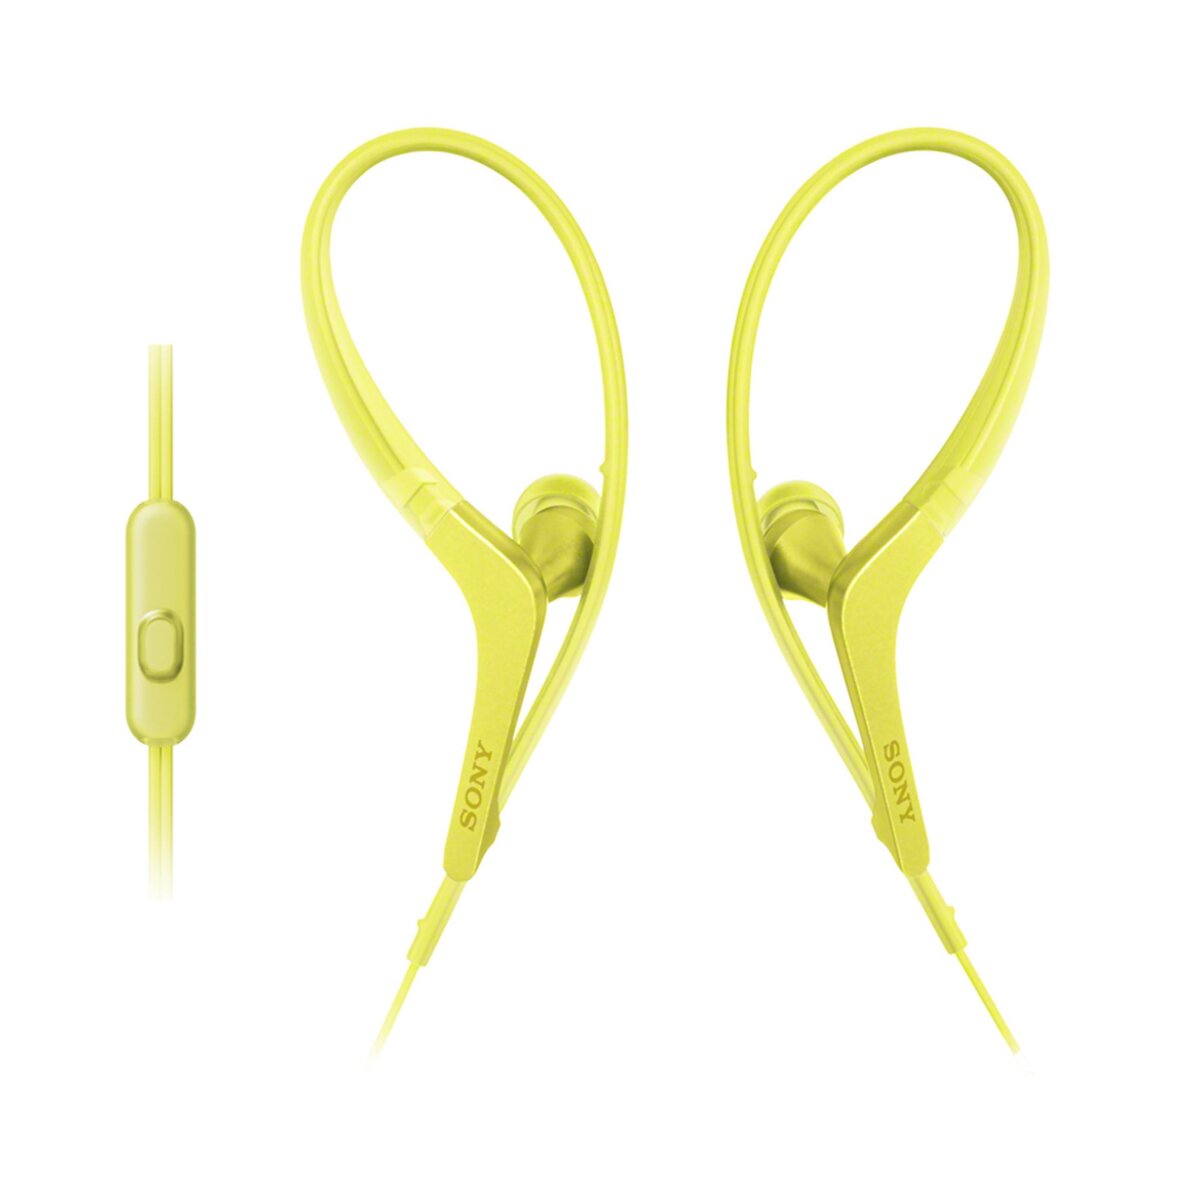 SONY MDR-AS210AP - Jaune - Écouteurs intra-auriculaires Sport